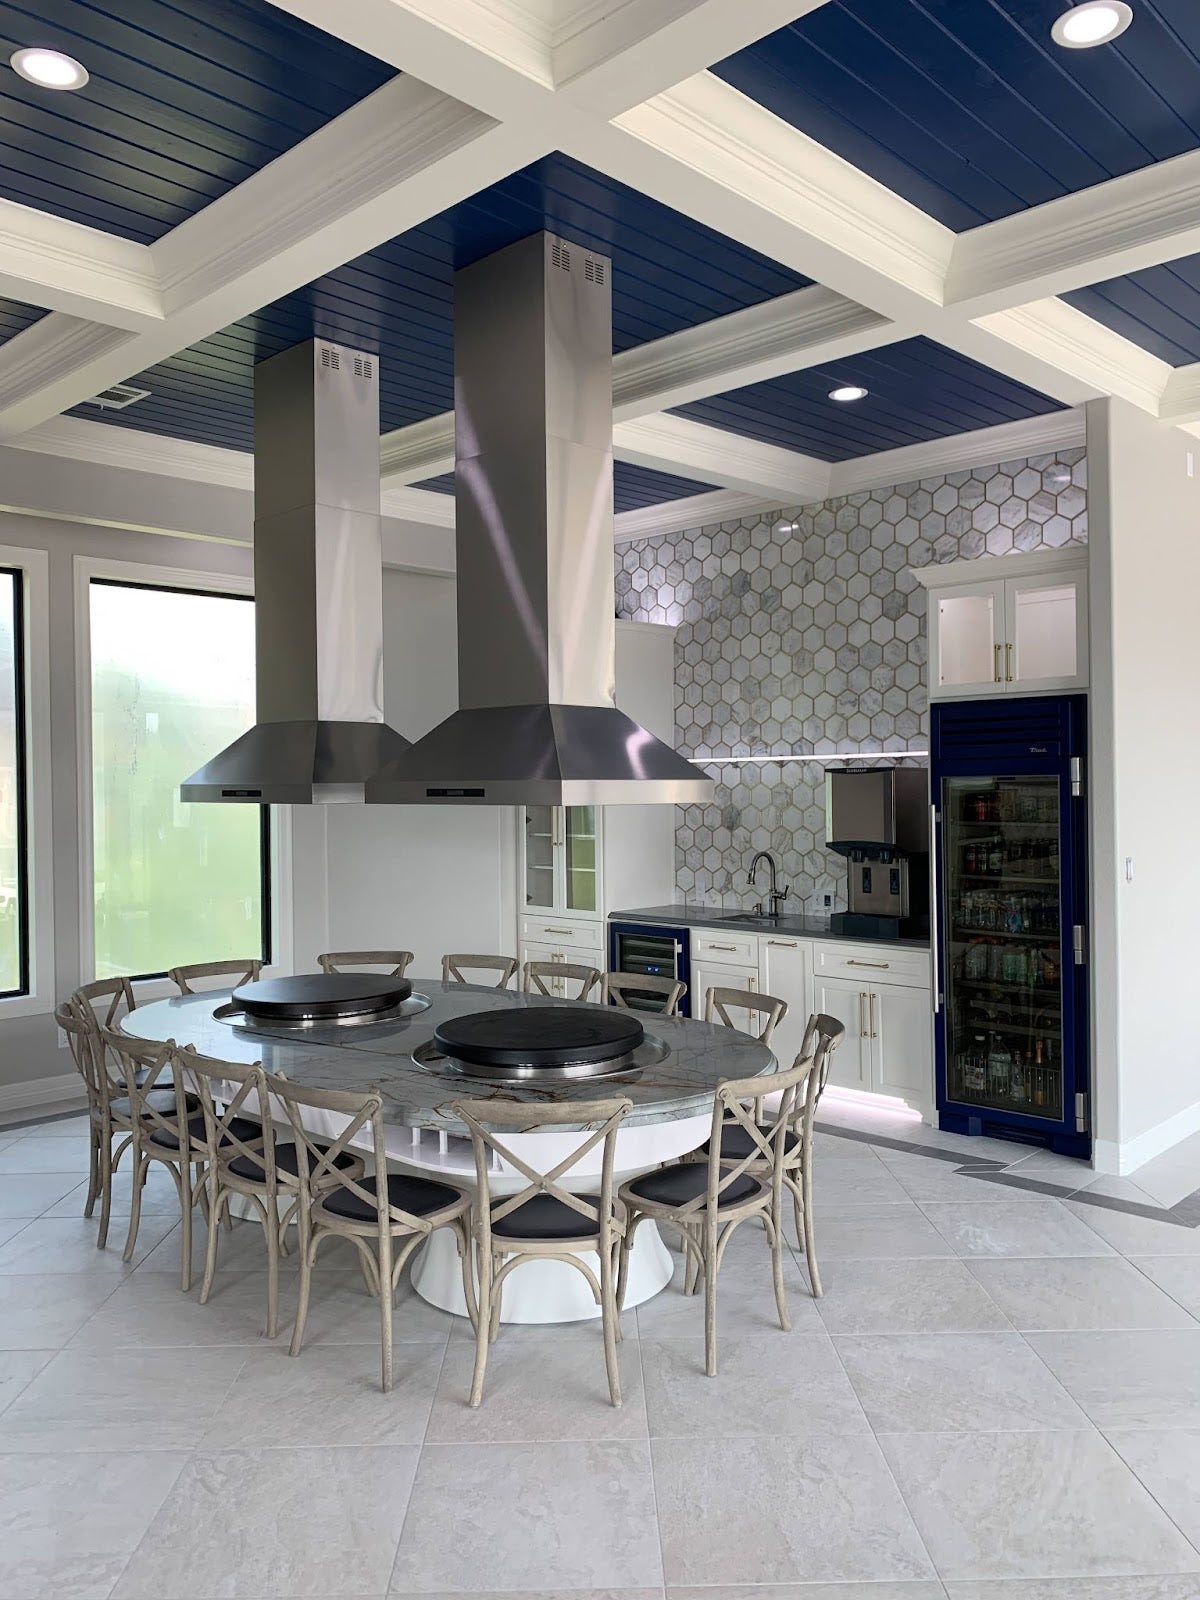 Spacious modern kitchen featuring two large extractor hoods, a central round dining table with a cooktop, and contrasting navy and white decor.